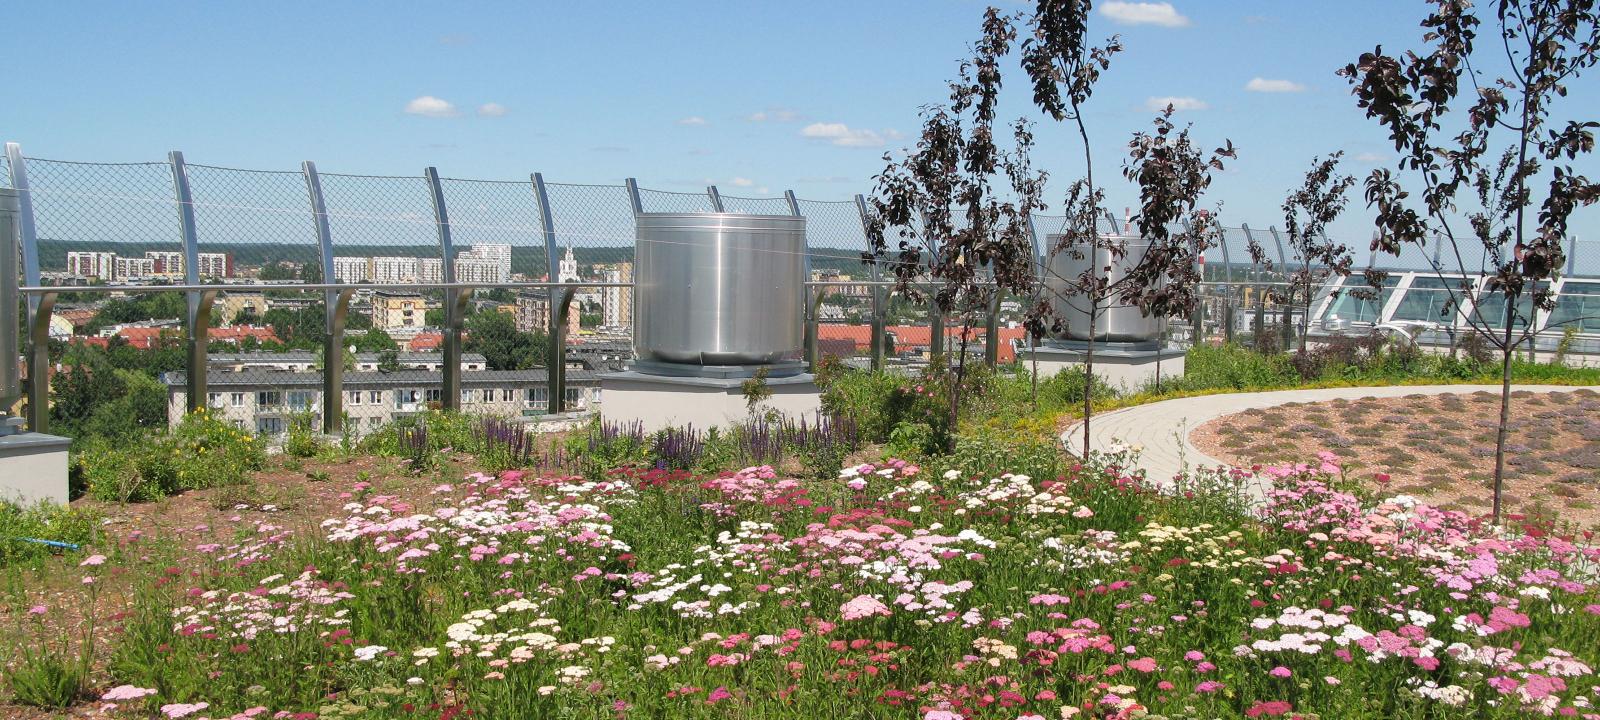 Roof garden with pink yarrow